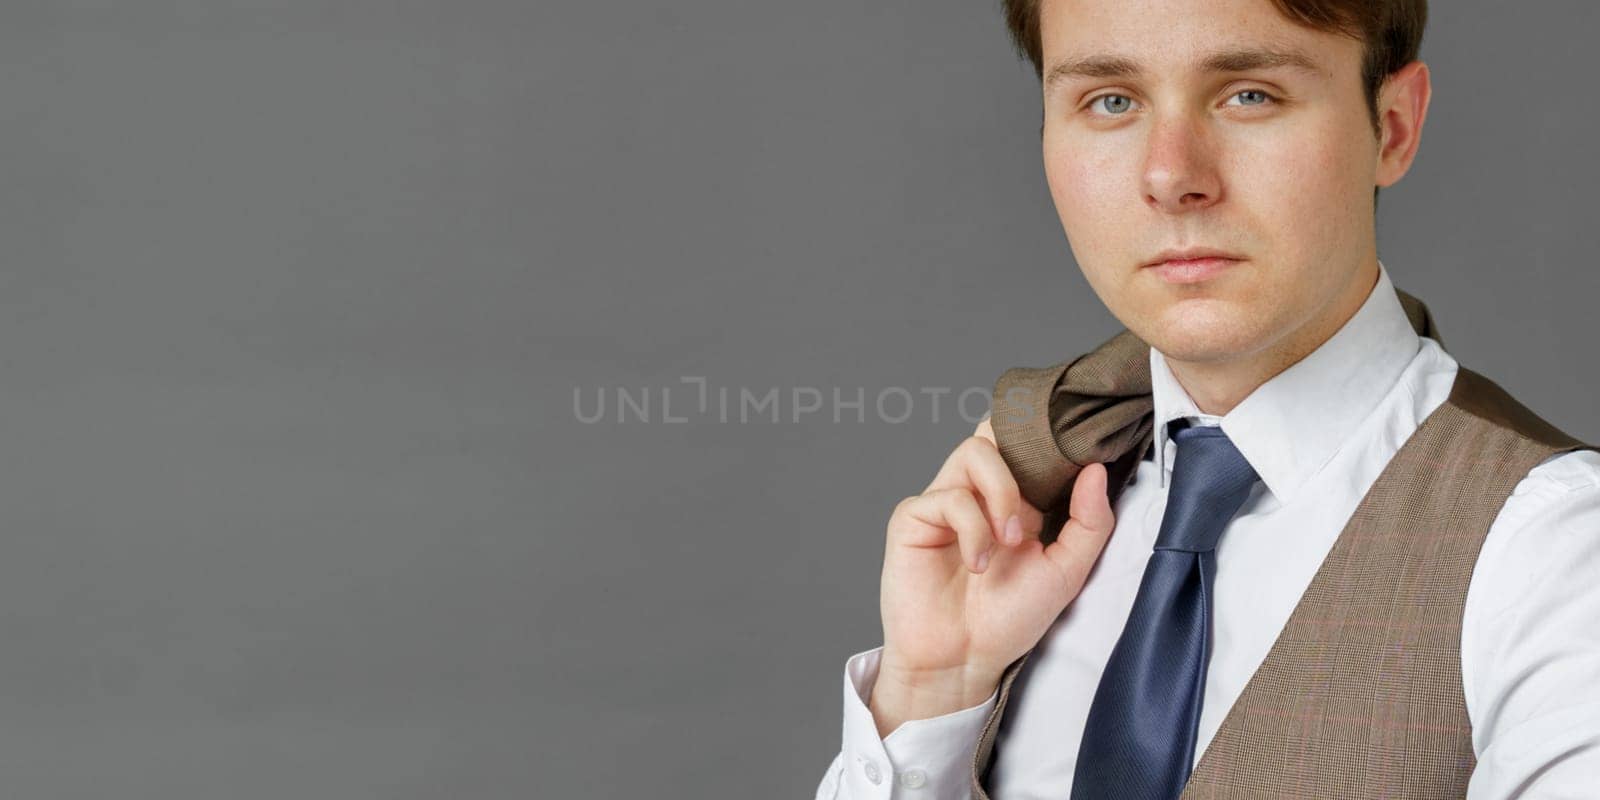 Portrait of a businessman who looks into the camera and holds a jacket over his shoulder. Gray background. Business and finance concept